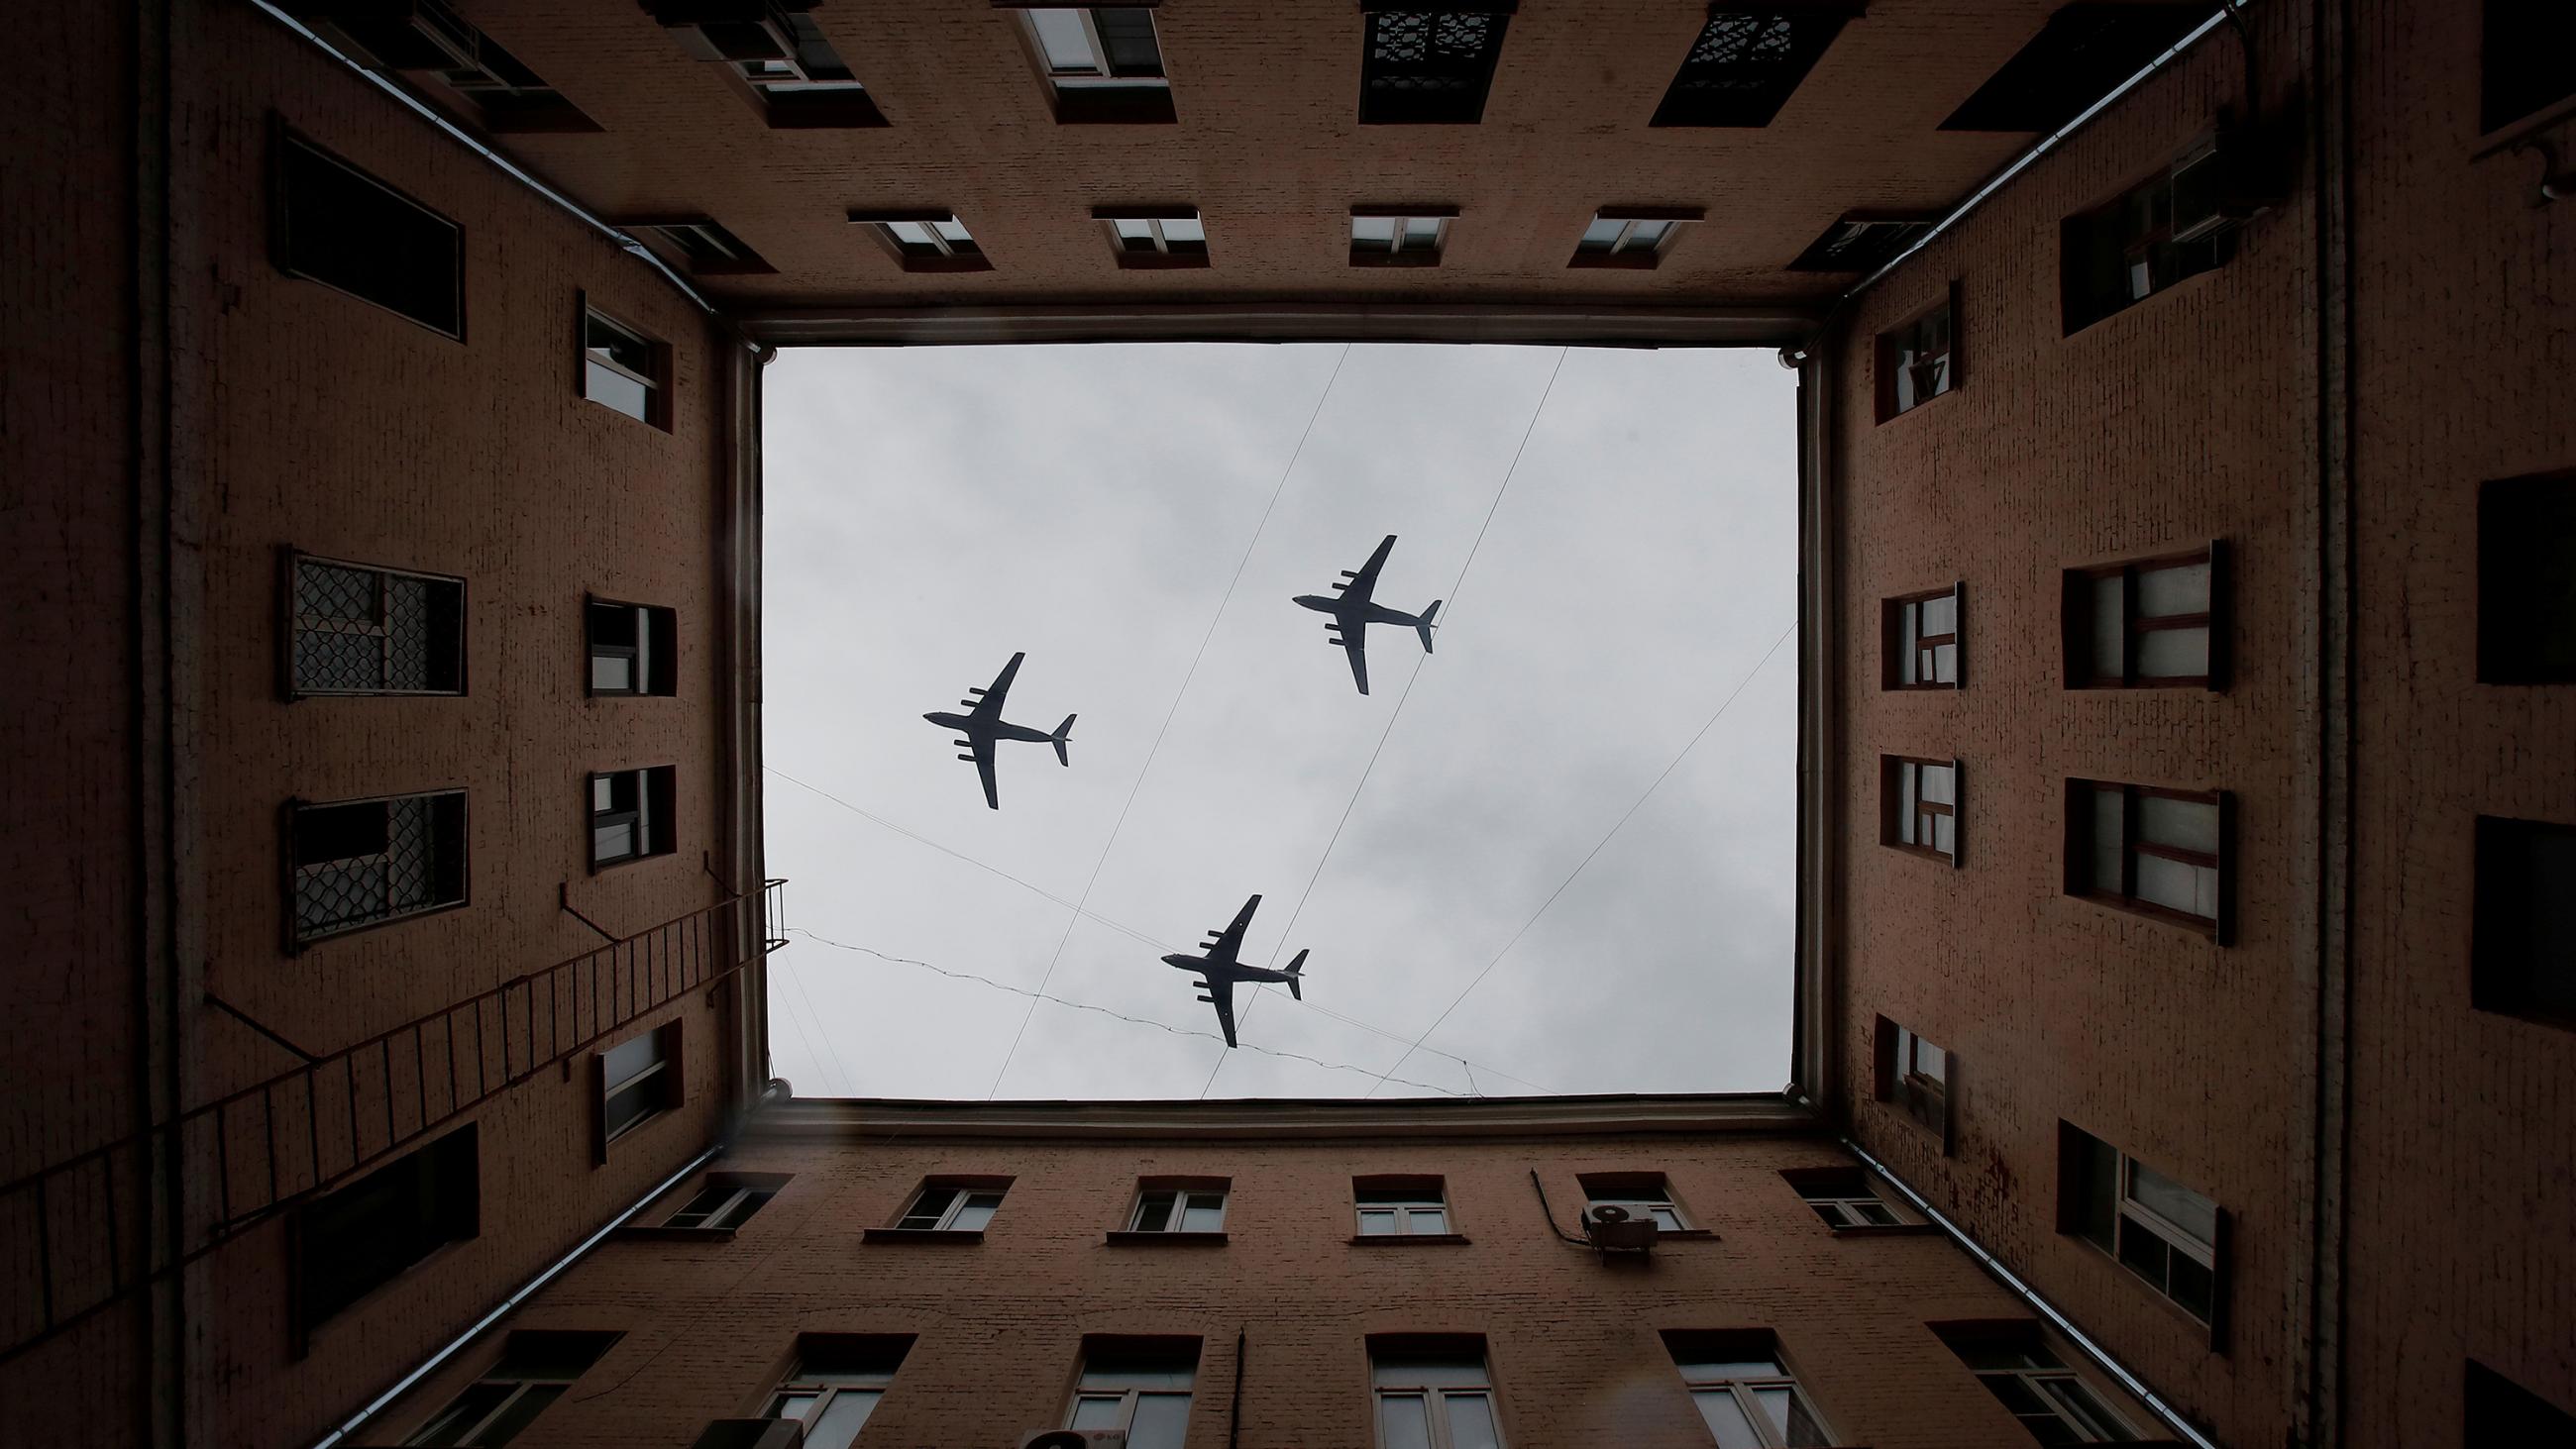 The striking image shows three planes photographed looking up througg the open courtyard of a large apartment-style building. 